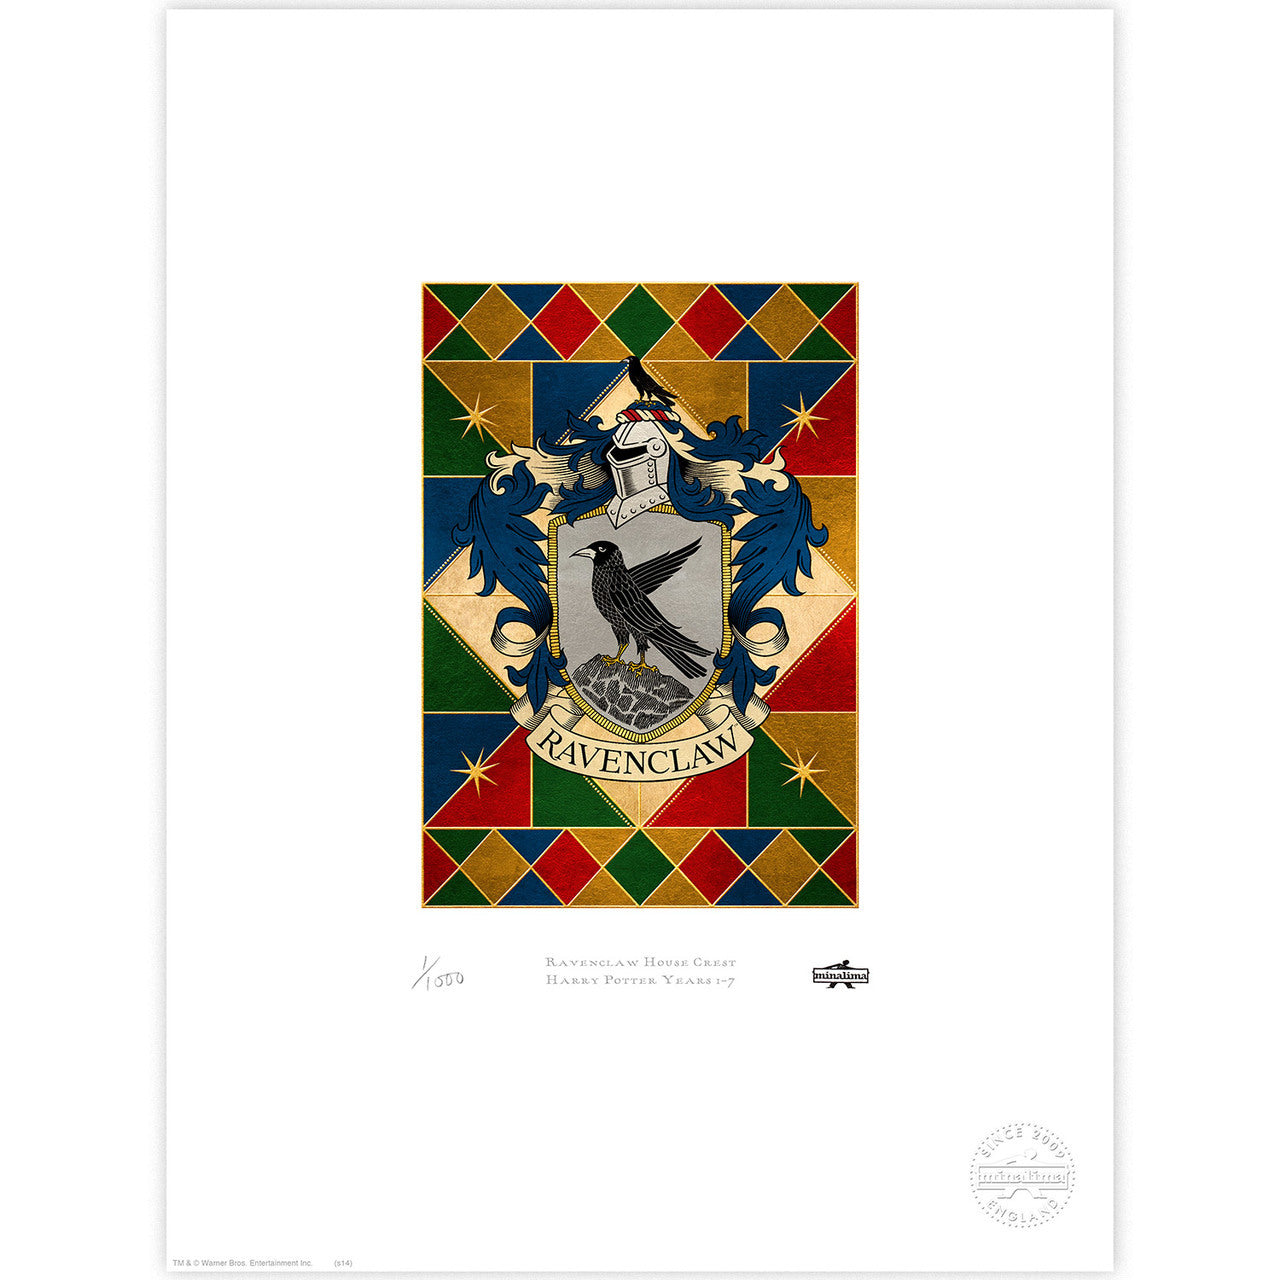 Ravenclaw House Crest Limited Edition Art Print